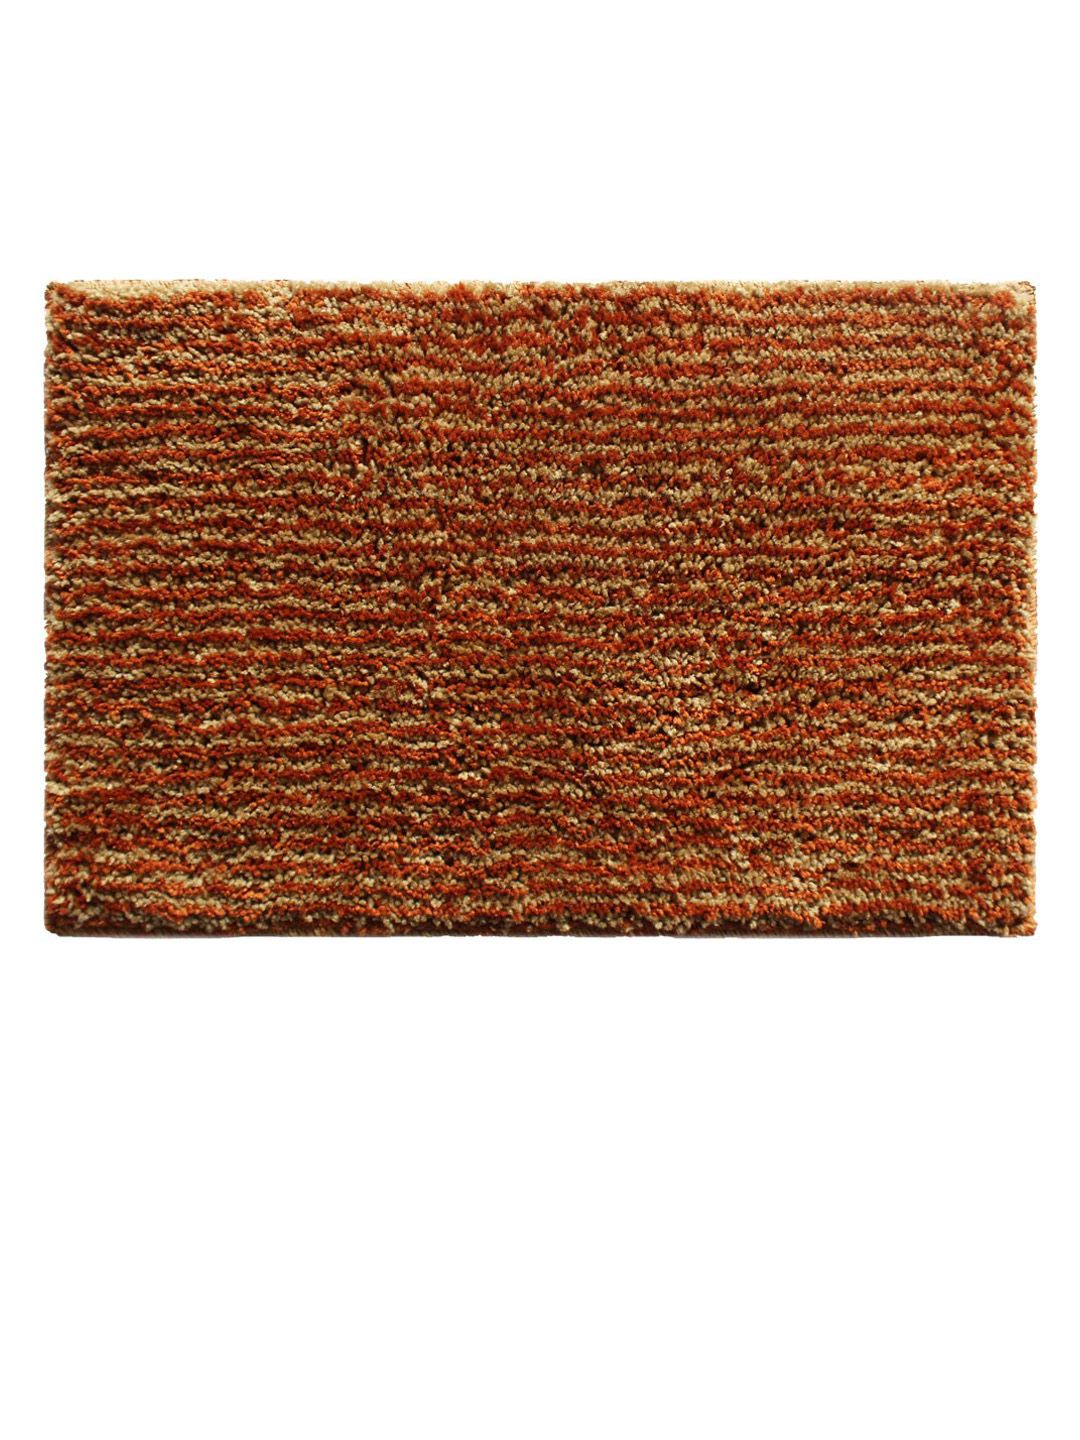 LUXEHOME INTERNATIONAL  Rust Striped  2200 GSM Bath Rug Price in India